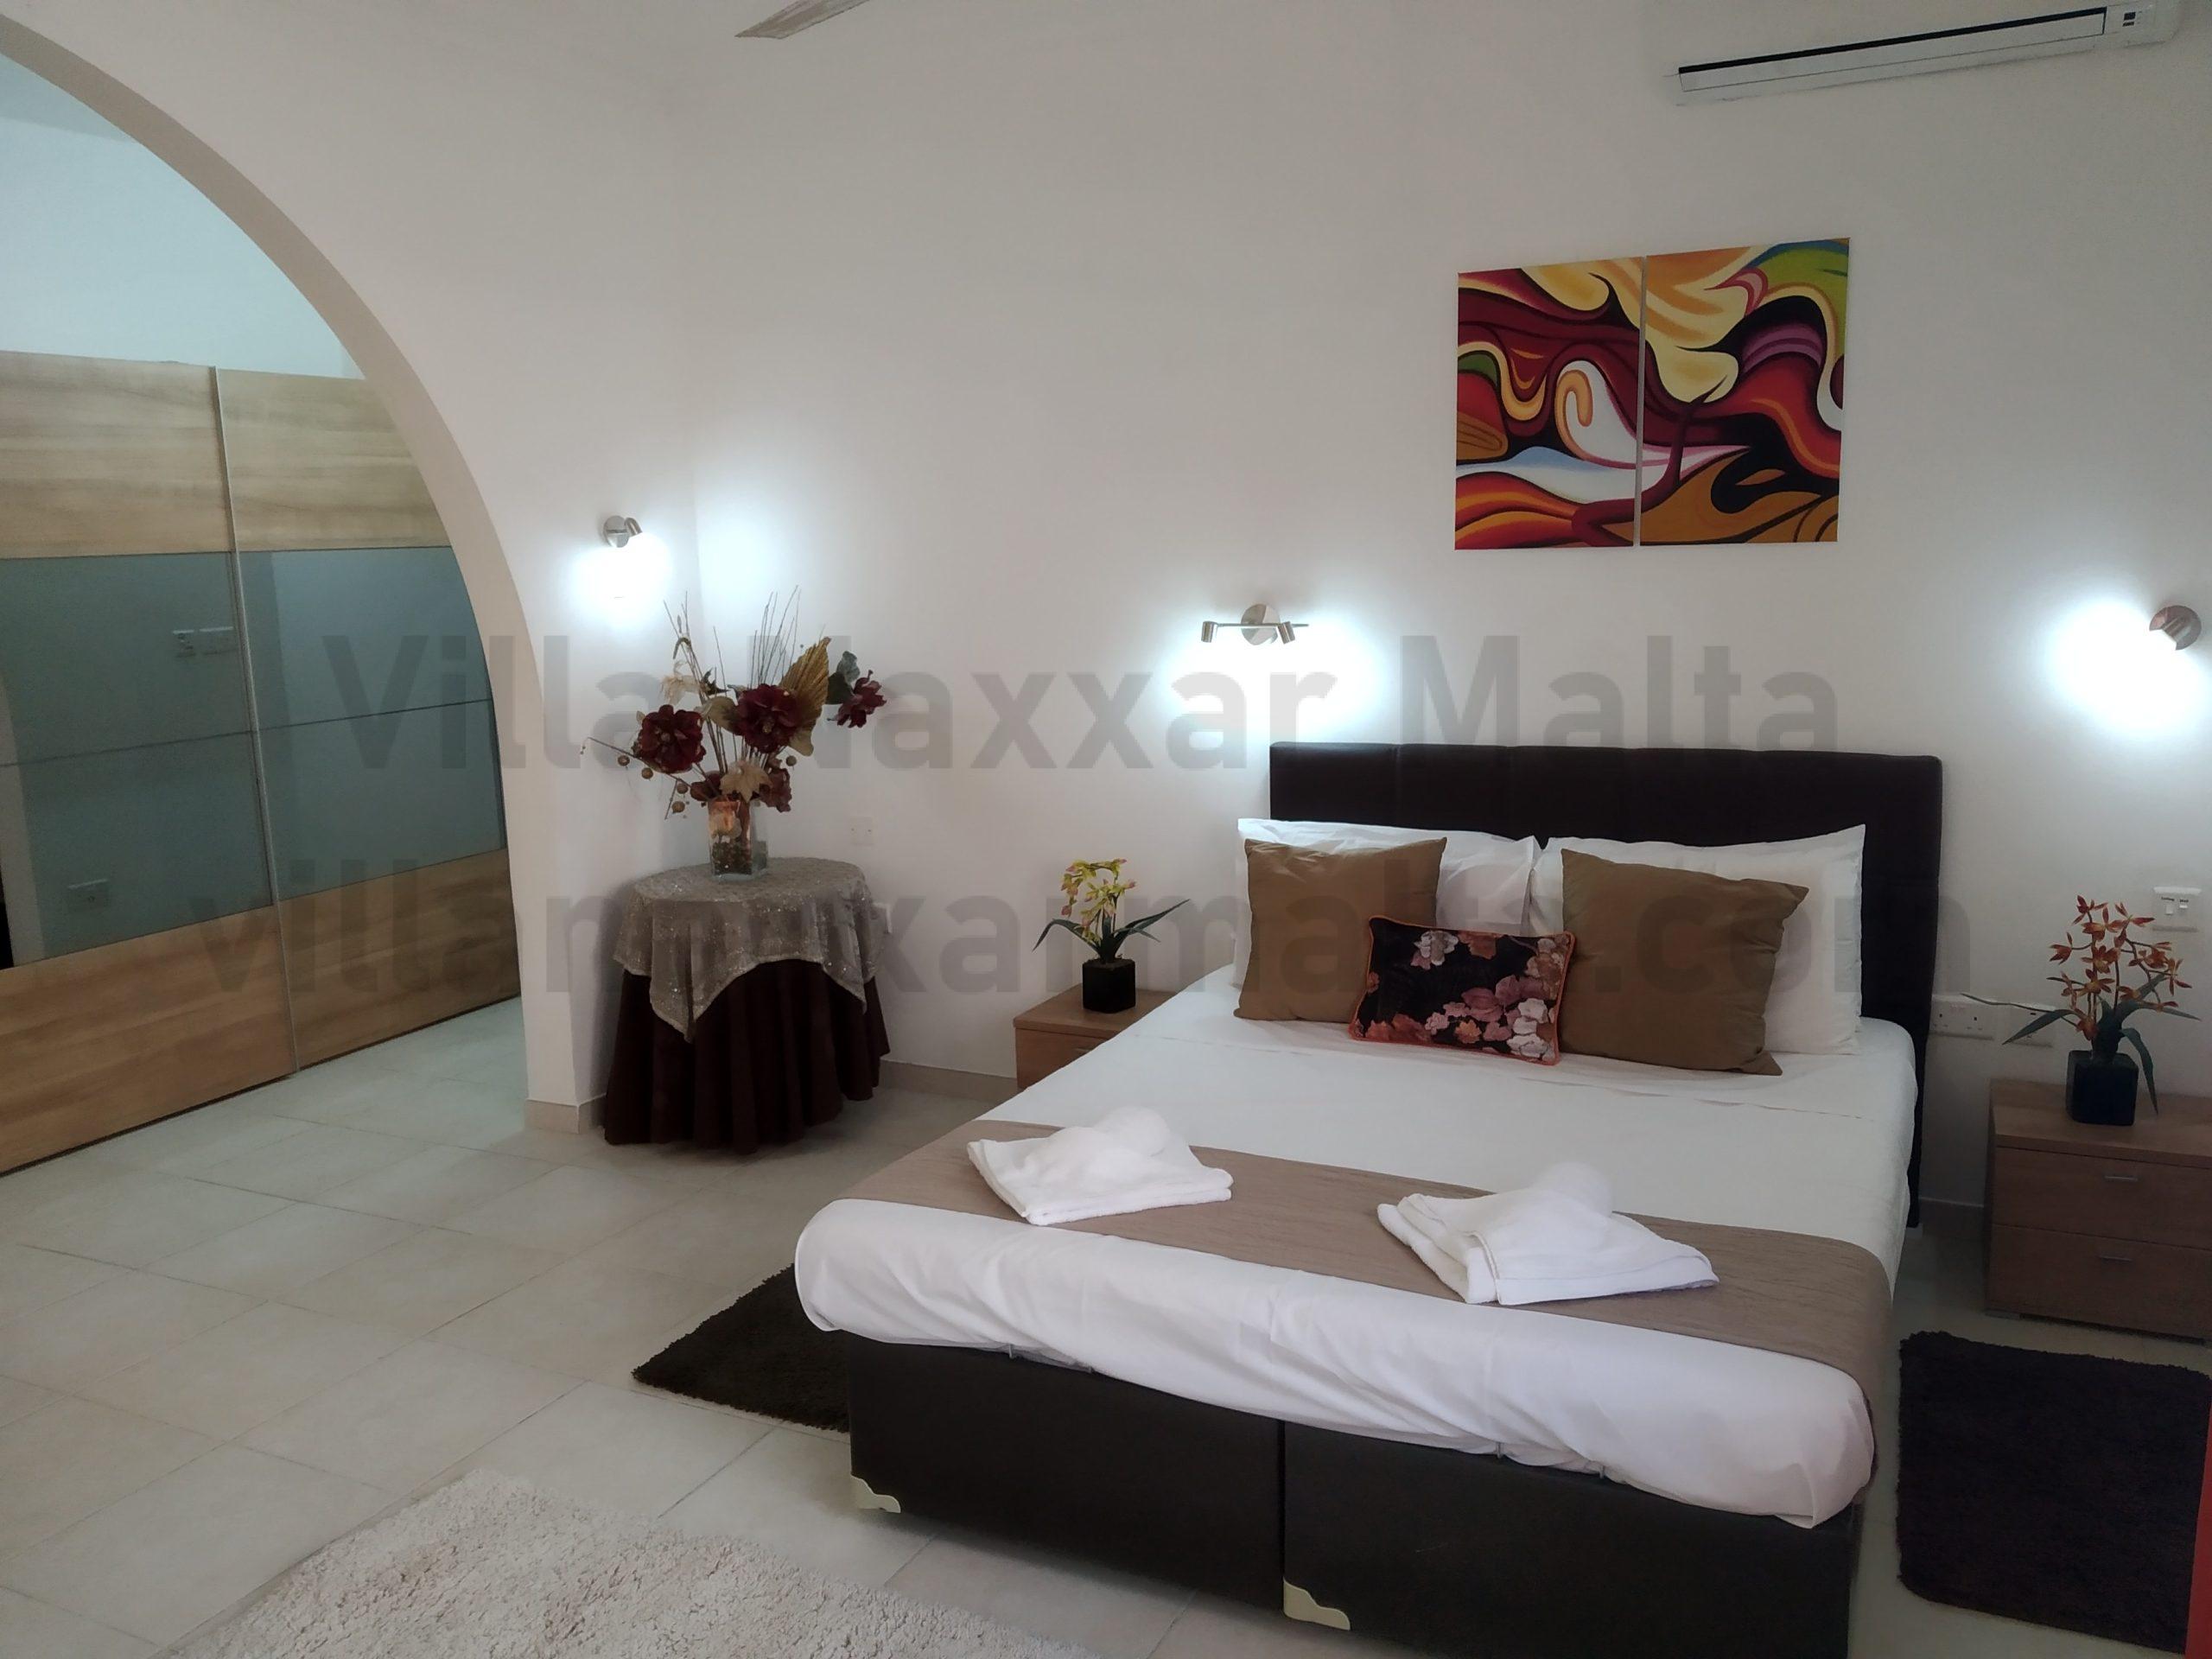 Villa Naxxar Malta – Main Bedroom (double Bed) with bathroom ensuite, large wardrobes, AC, WIFI and more ... space for additional beds